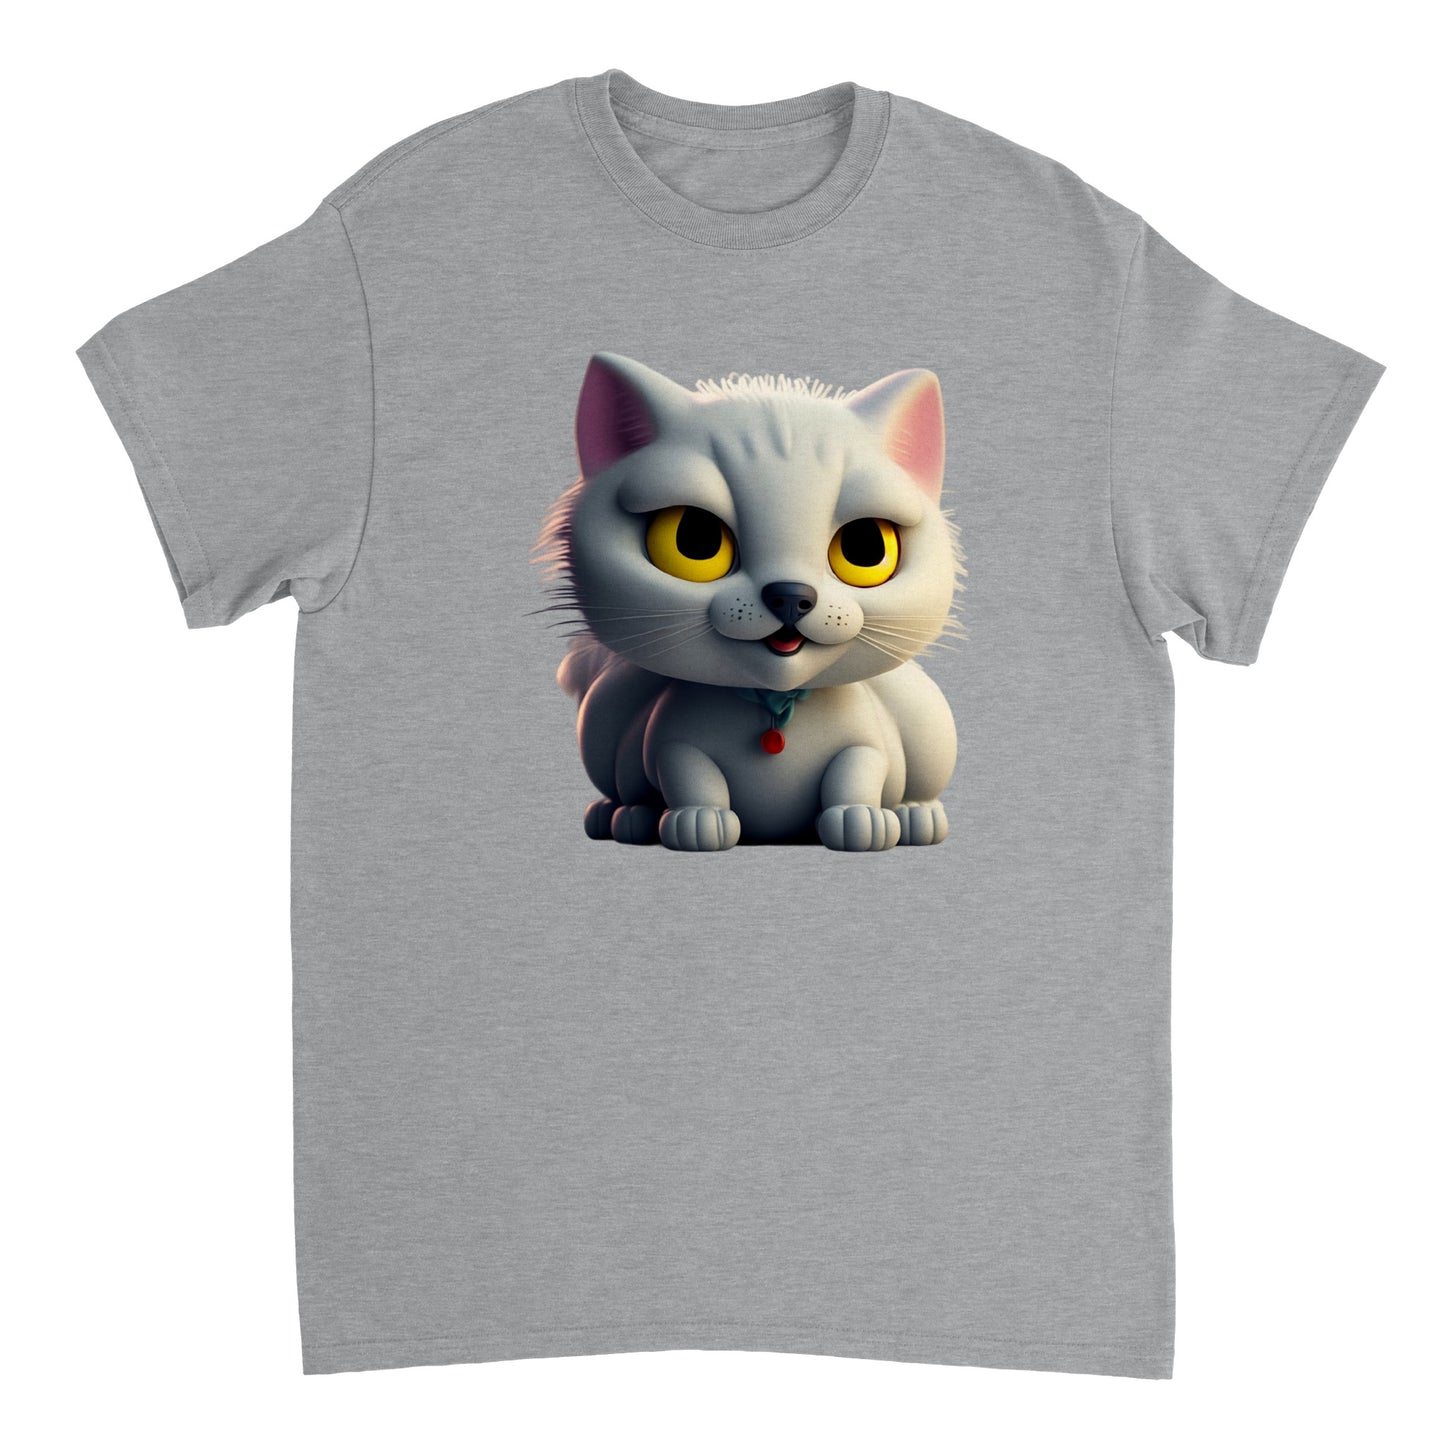 Adorable, Cool, Cute Cats and Kittens Toy - Heavyweight Unisex Crewneck T-shirt 52